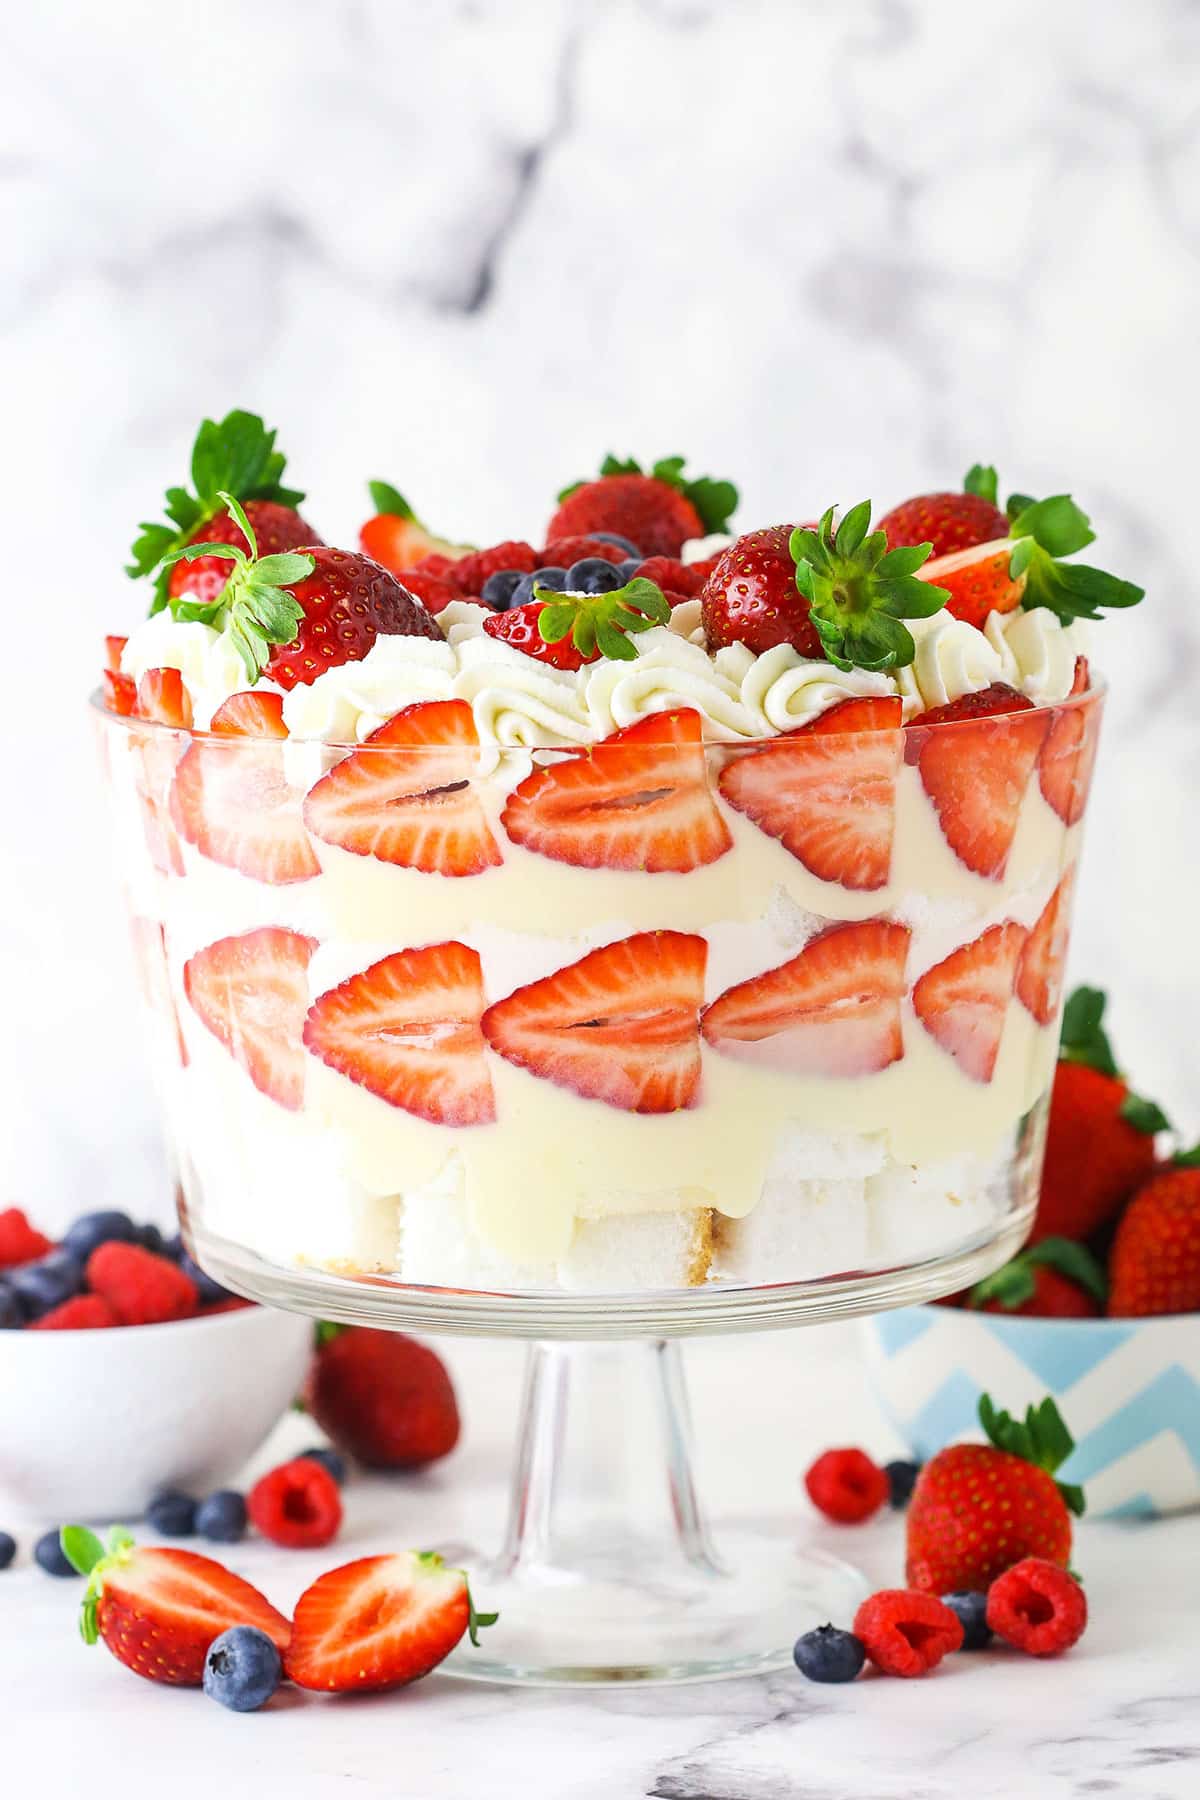 Patriotic Trifle Recipe - The Girl Who Ate Everything